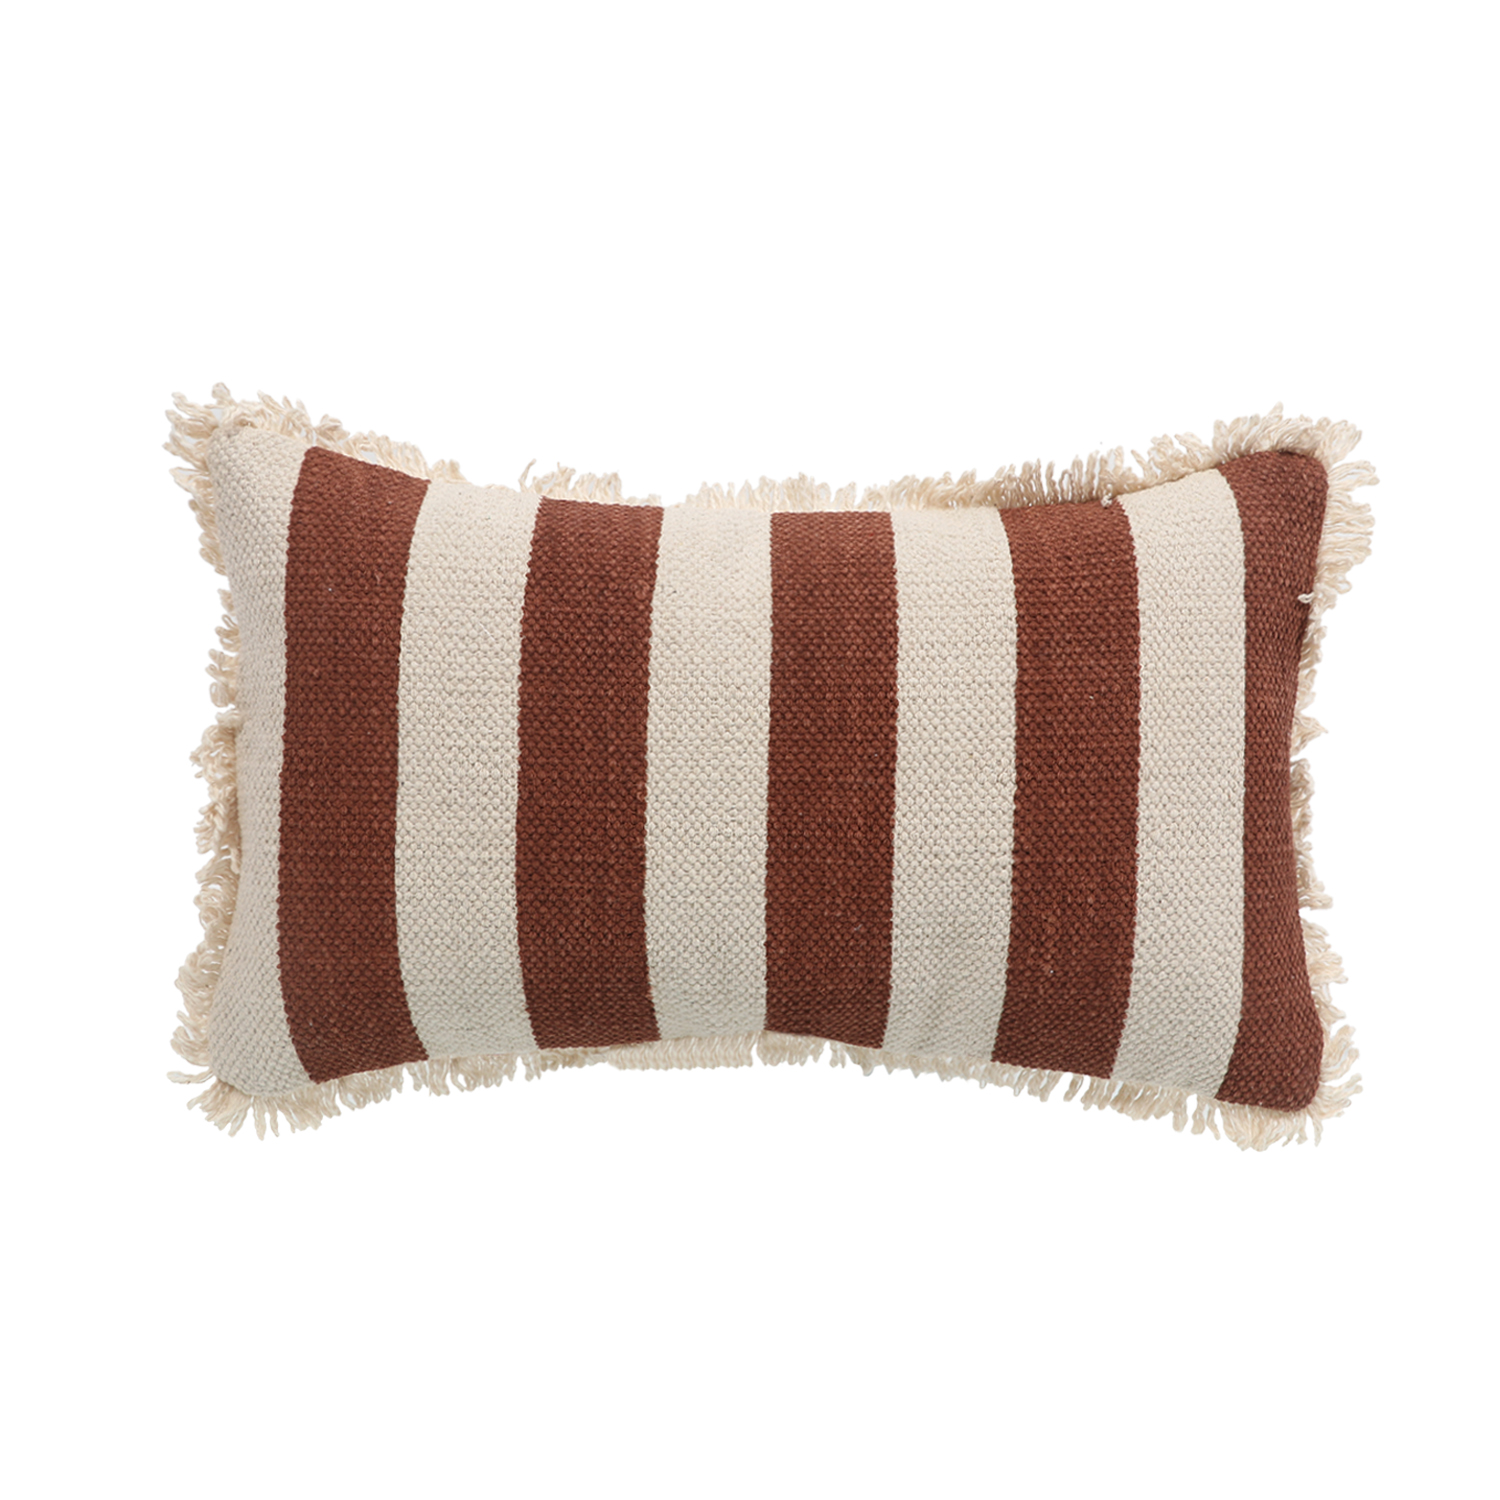 Printed Stripe Dark Brown Cushions Covers with fringes 12X20 Inch